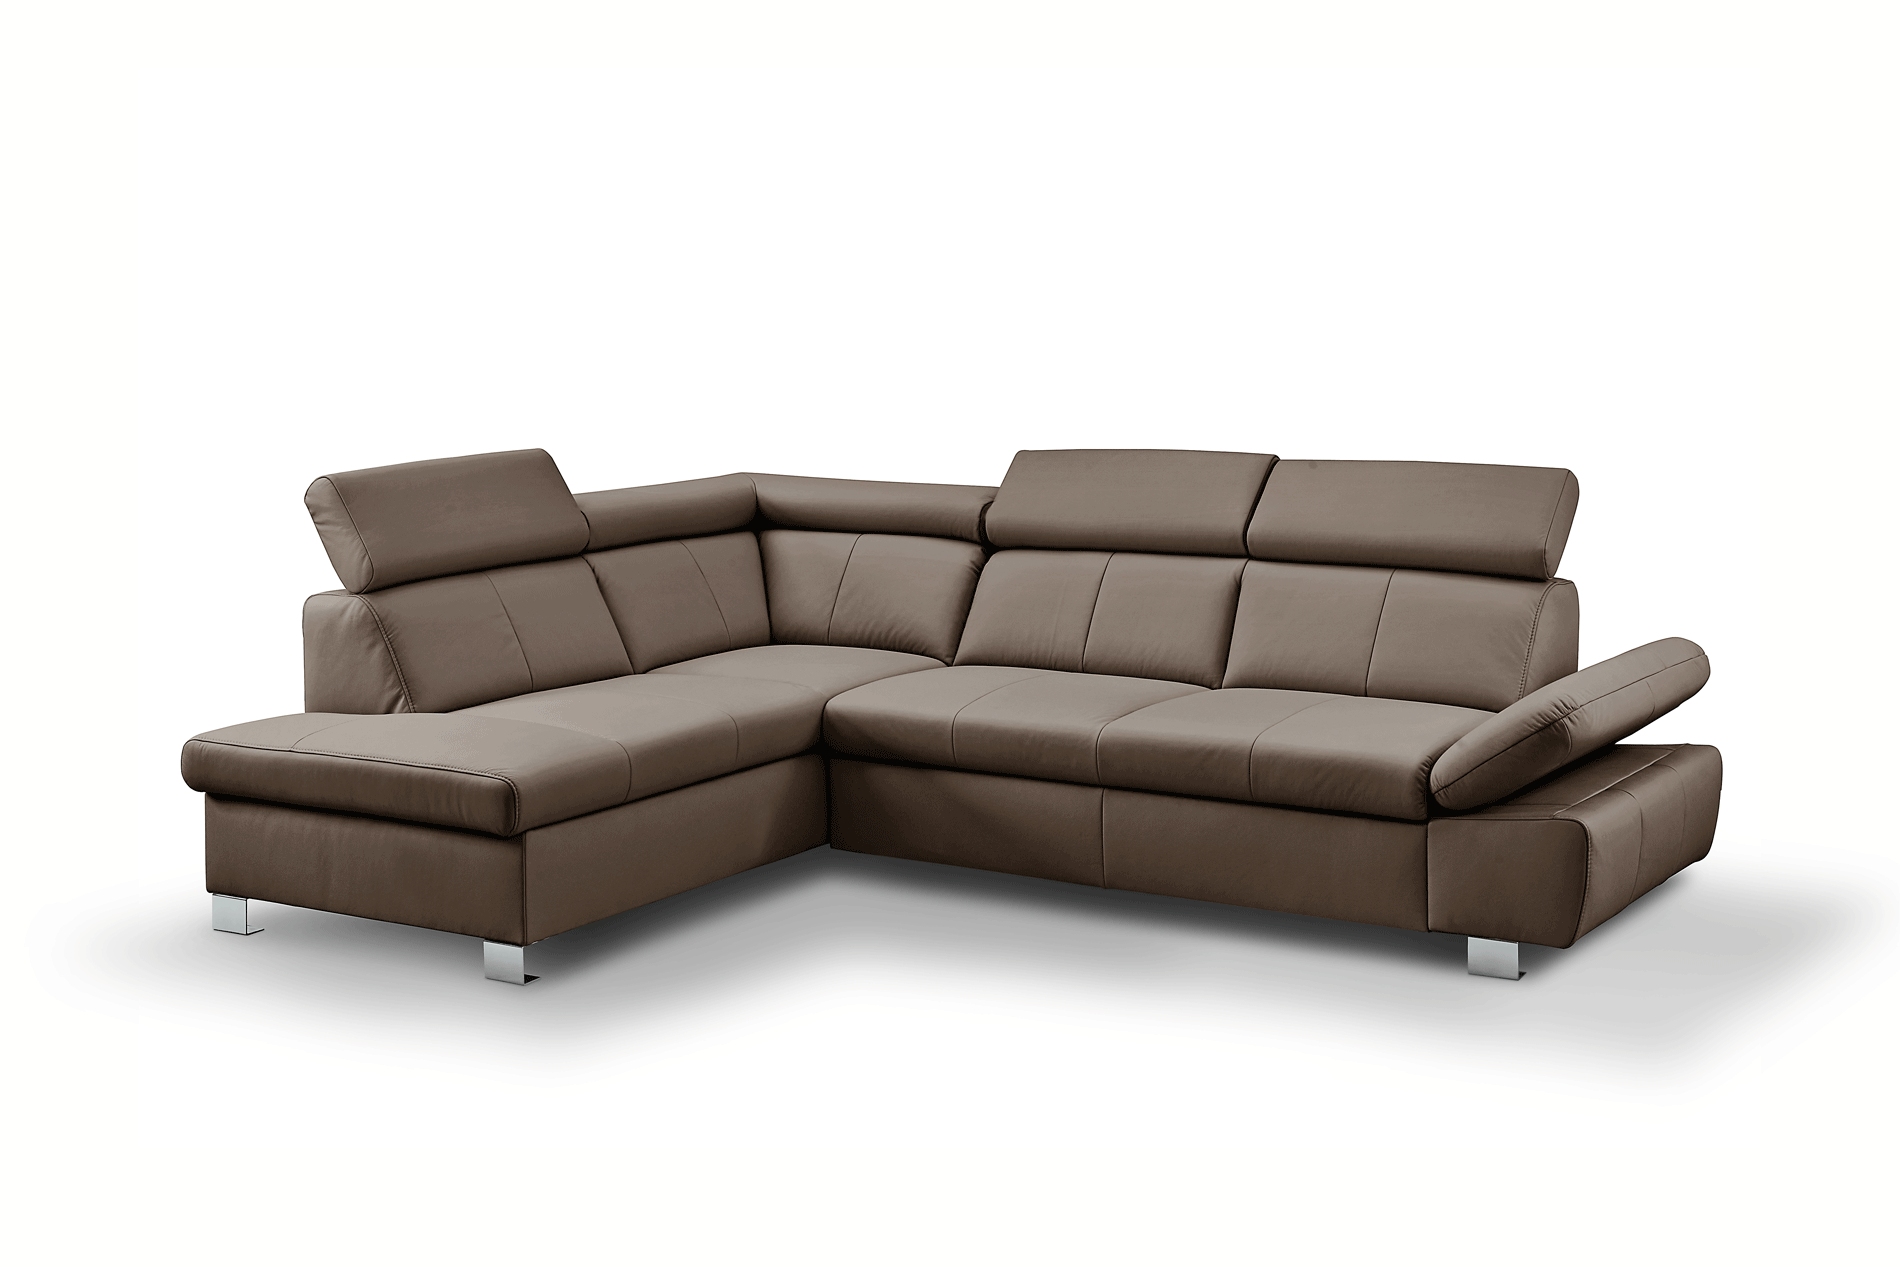 Brands Status Modern Collections, Italy Happy Sectional Leather